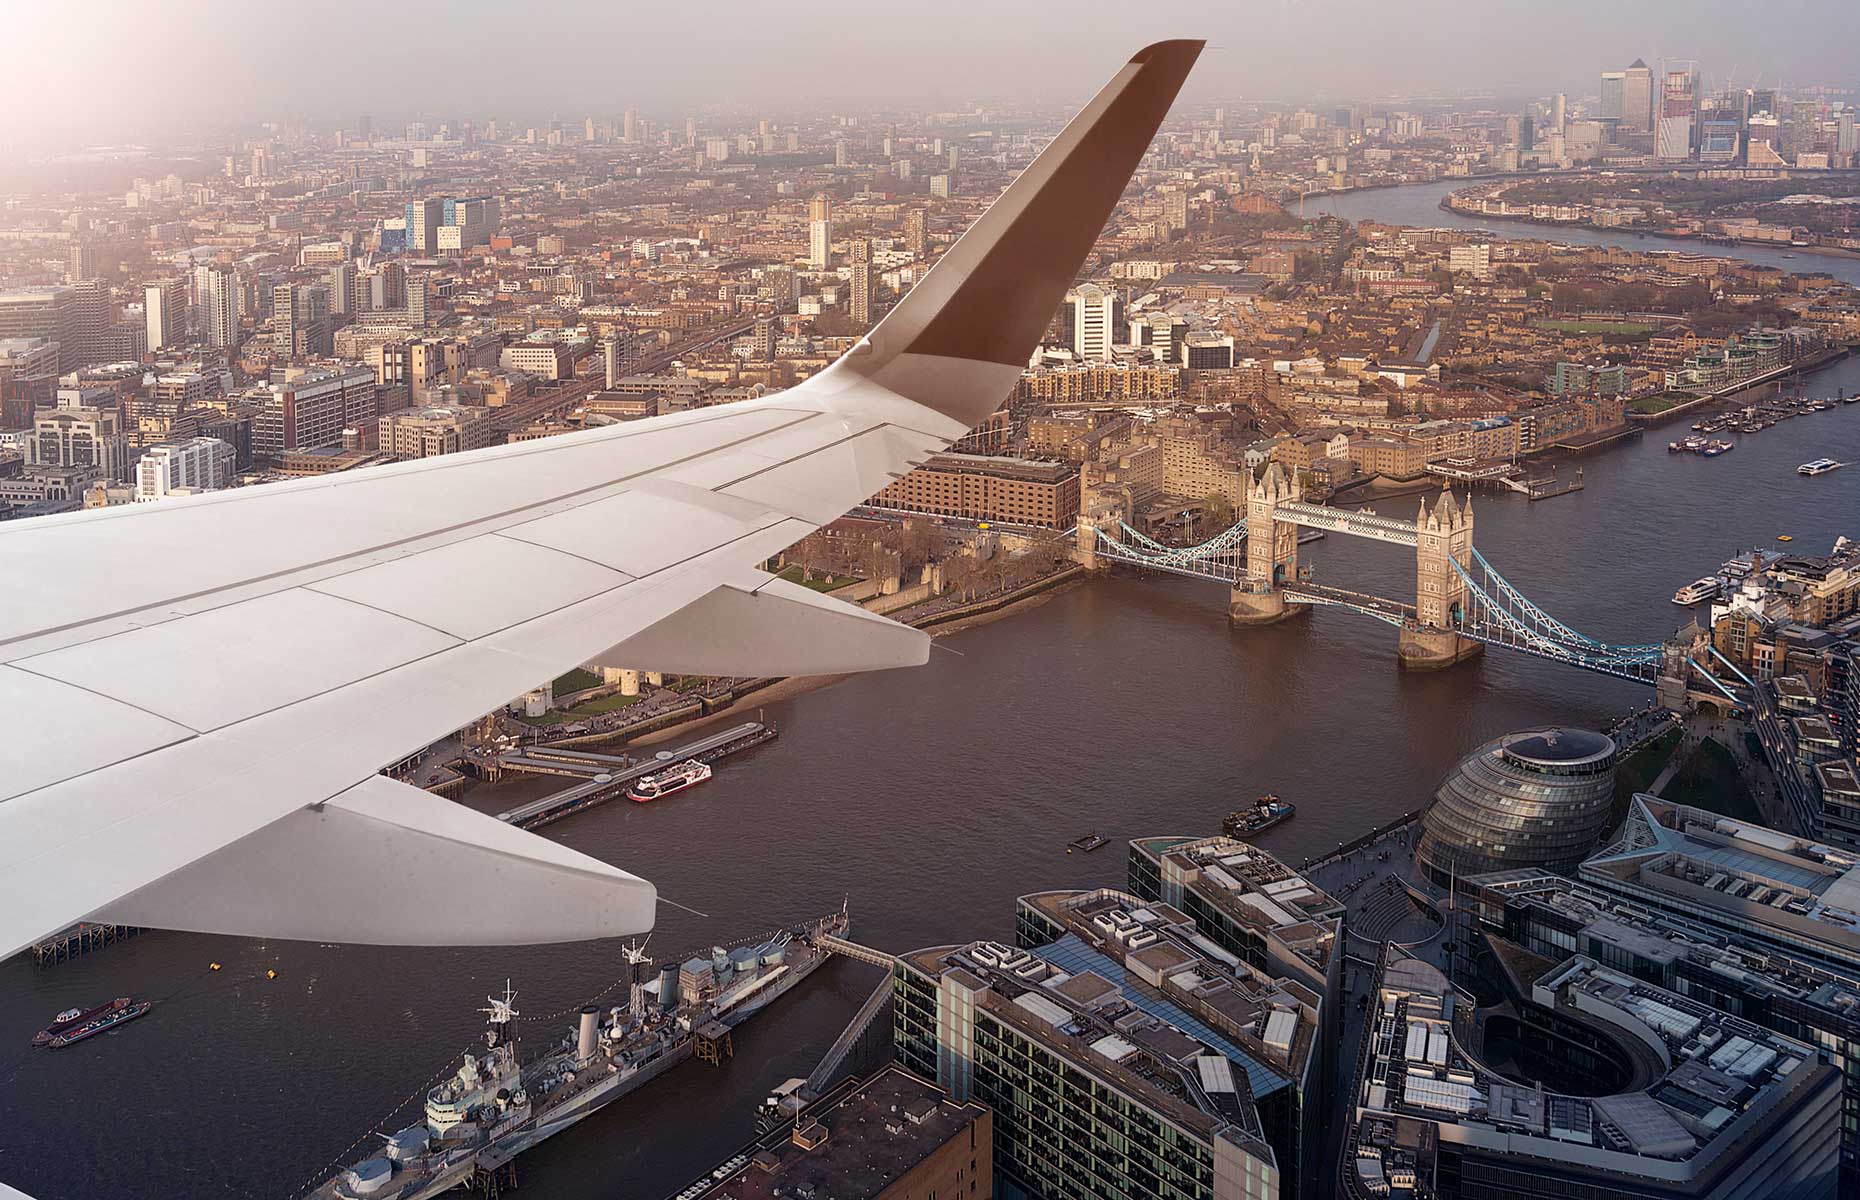 Plane flying over the River Thames in London, arriving in the UK (Image:phoelixDE/Shutterstock)